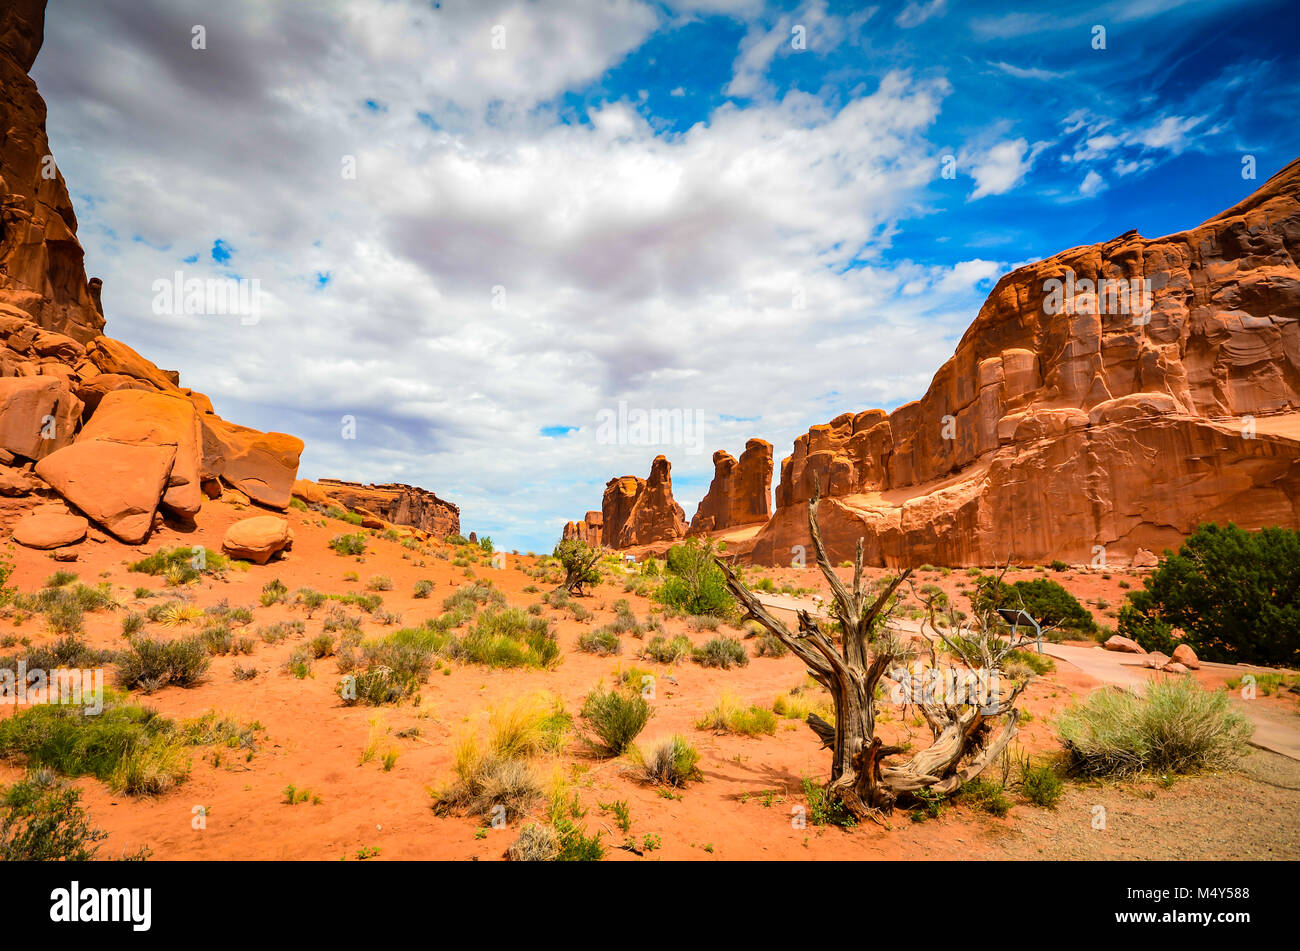 The Park Avenue Trail is one of the first major attractions within Arches National Park. It is a one-mile trail that follows the bottom of a canyon at Stock Photo